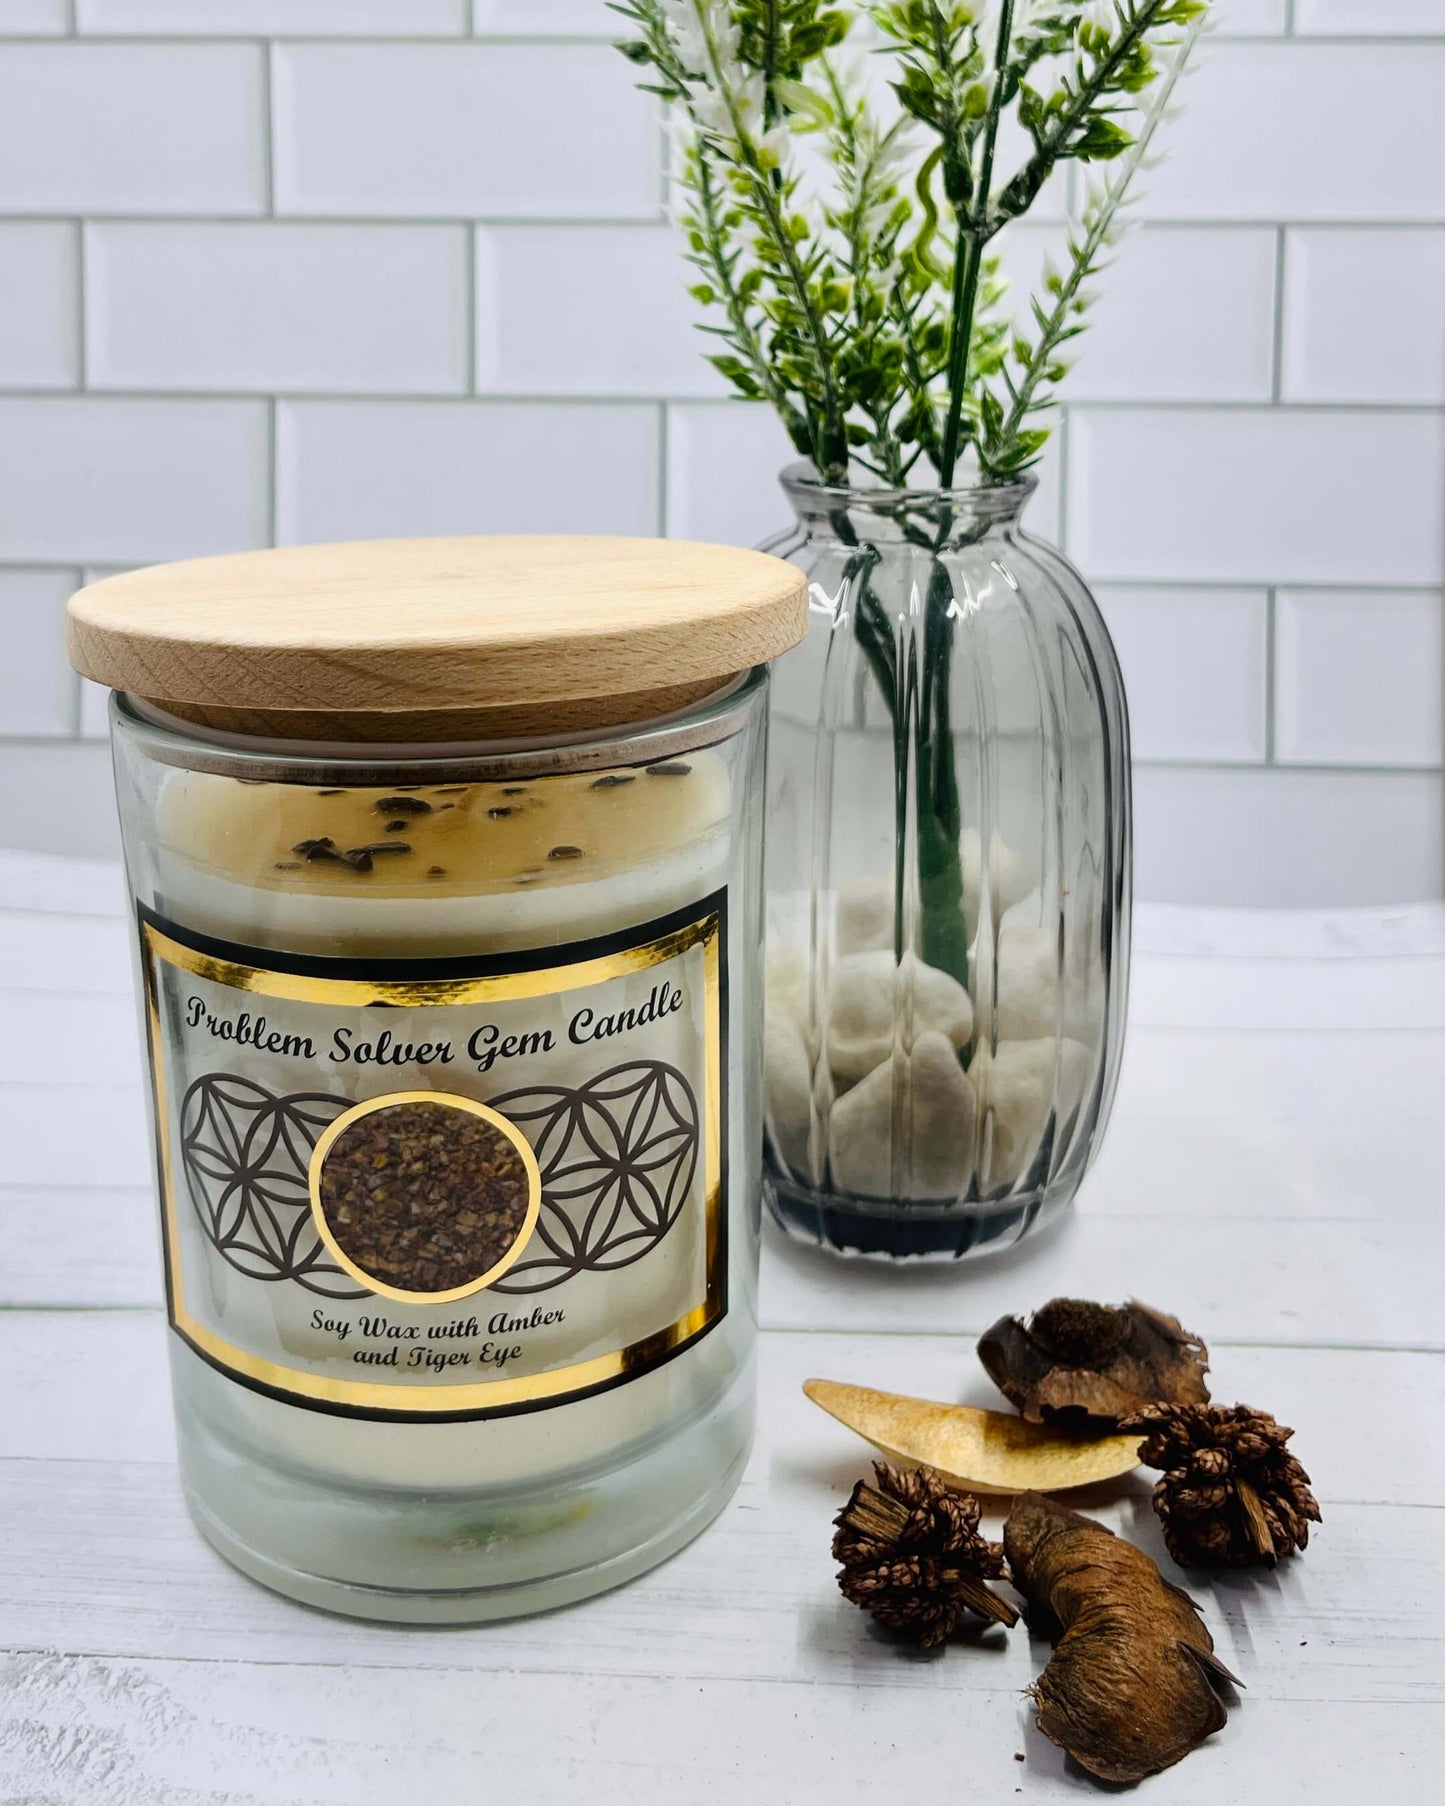 Harmonia AMBER Soy Wax Candle - Tiger Eye Problem Solving